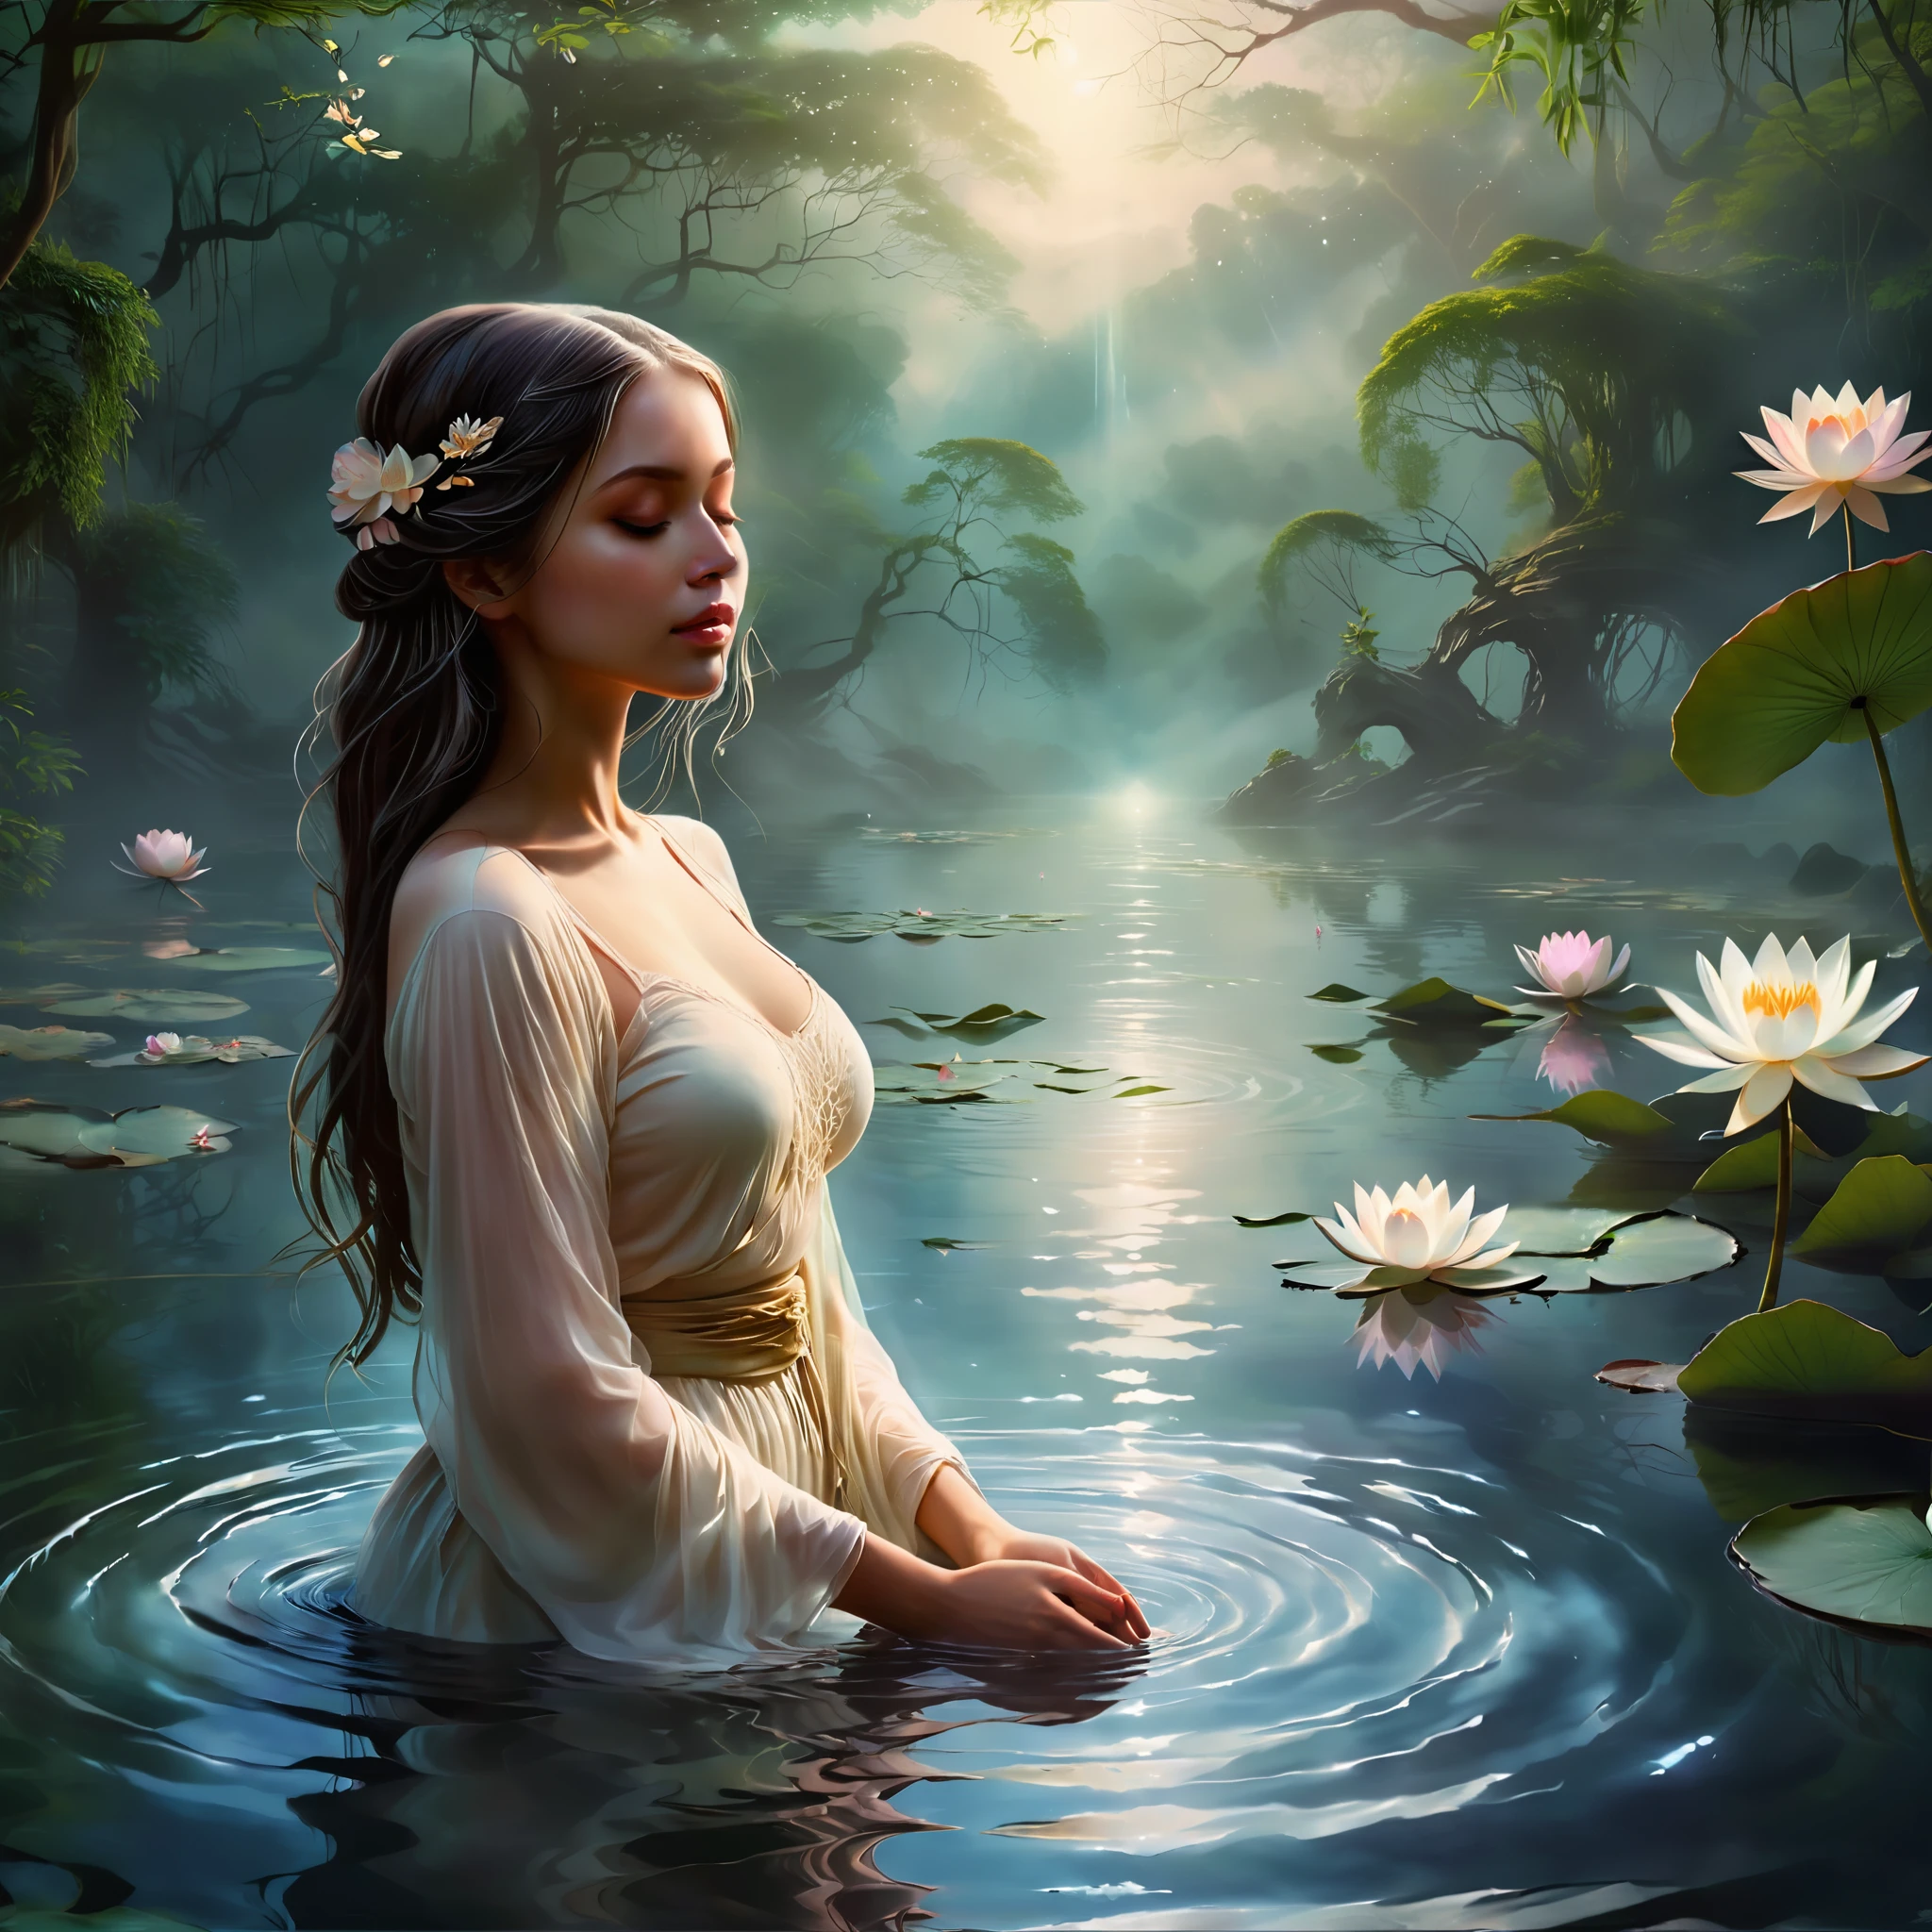 (best quality,4k,8k,highres,masterpiece:1.2),ultra-detailed,(realistic,photorealistic,photo-realistic:1.37),a girl by the pond,dusk lighting,serene atmosphere,ripples in the water,magical mist,faint reflections,peaceful ambiance,natural colors,long flowing hair,feminine grace,ethereal glow,twinkling stars,whispering wind,tranquil setting,soft shadows,romantic scenery,gentle breeze,delicate flowers,enchanted surroundings,subtle elegance,serenity in nature,sublime beauty,subdued tones,dreamlike effect,water lilies floating,harmonious composition,vibrant yet serene,subtle tranquility,calm and reflective,graceful posture,moment of stillness,quiet contemplation,surreal landscape,luminous sky,soft pastel hues,silhouette of trees,beauty in simplicity,artistic impression,natural harmony,sublime serenity,subtle beauty,infinite calm,gentle warmth